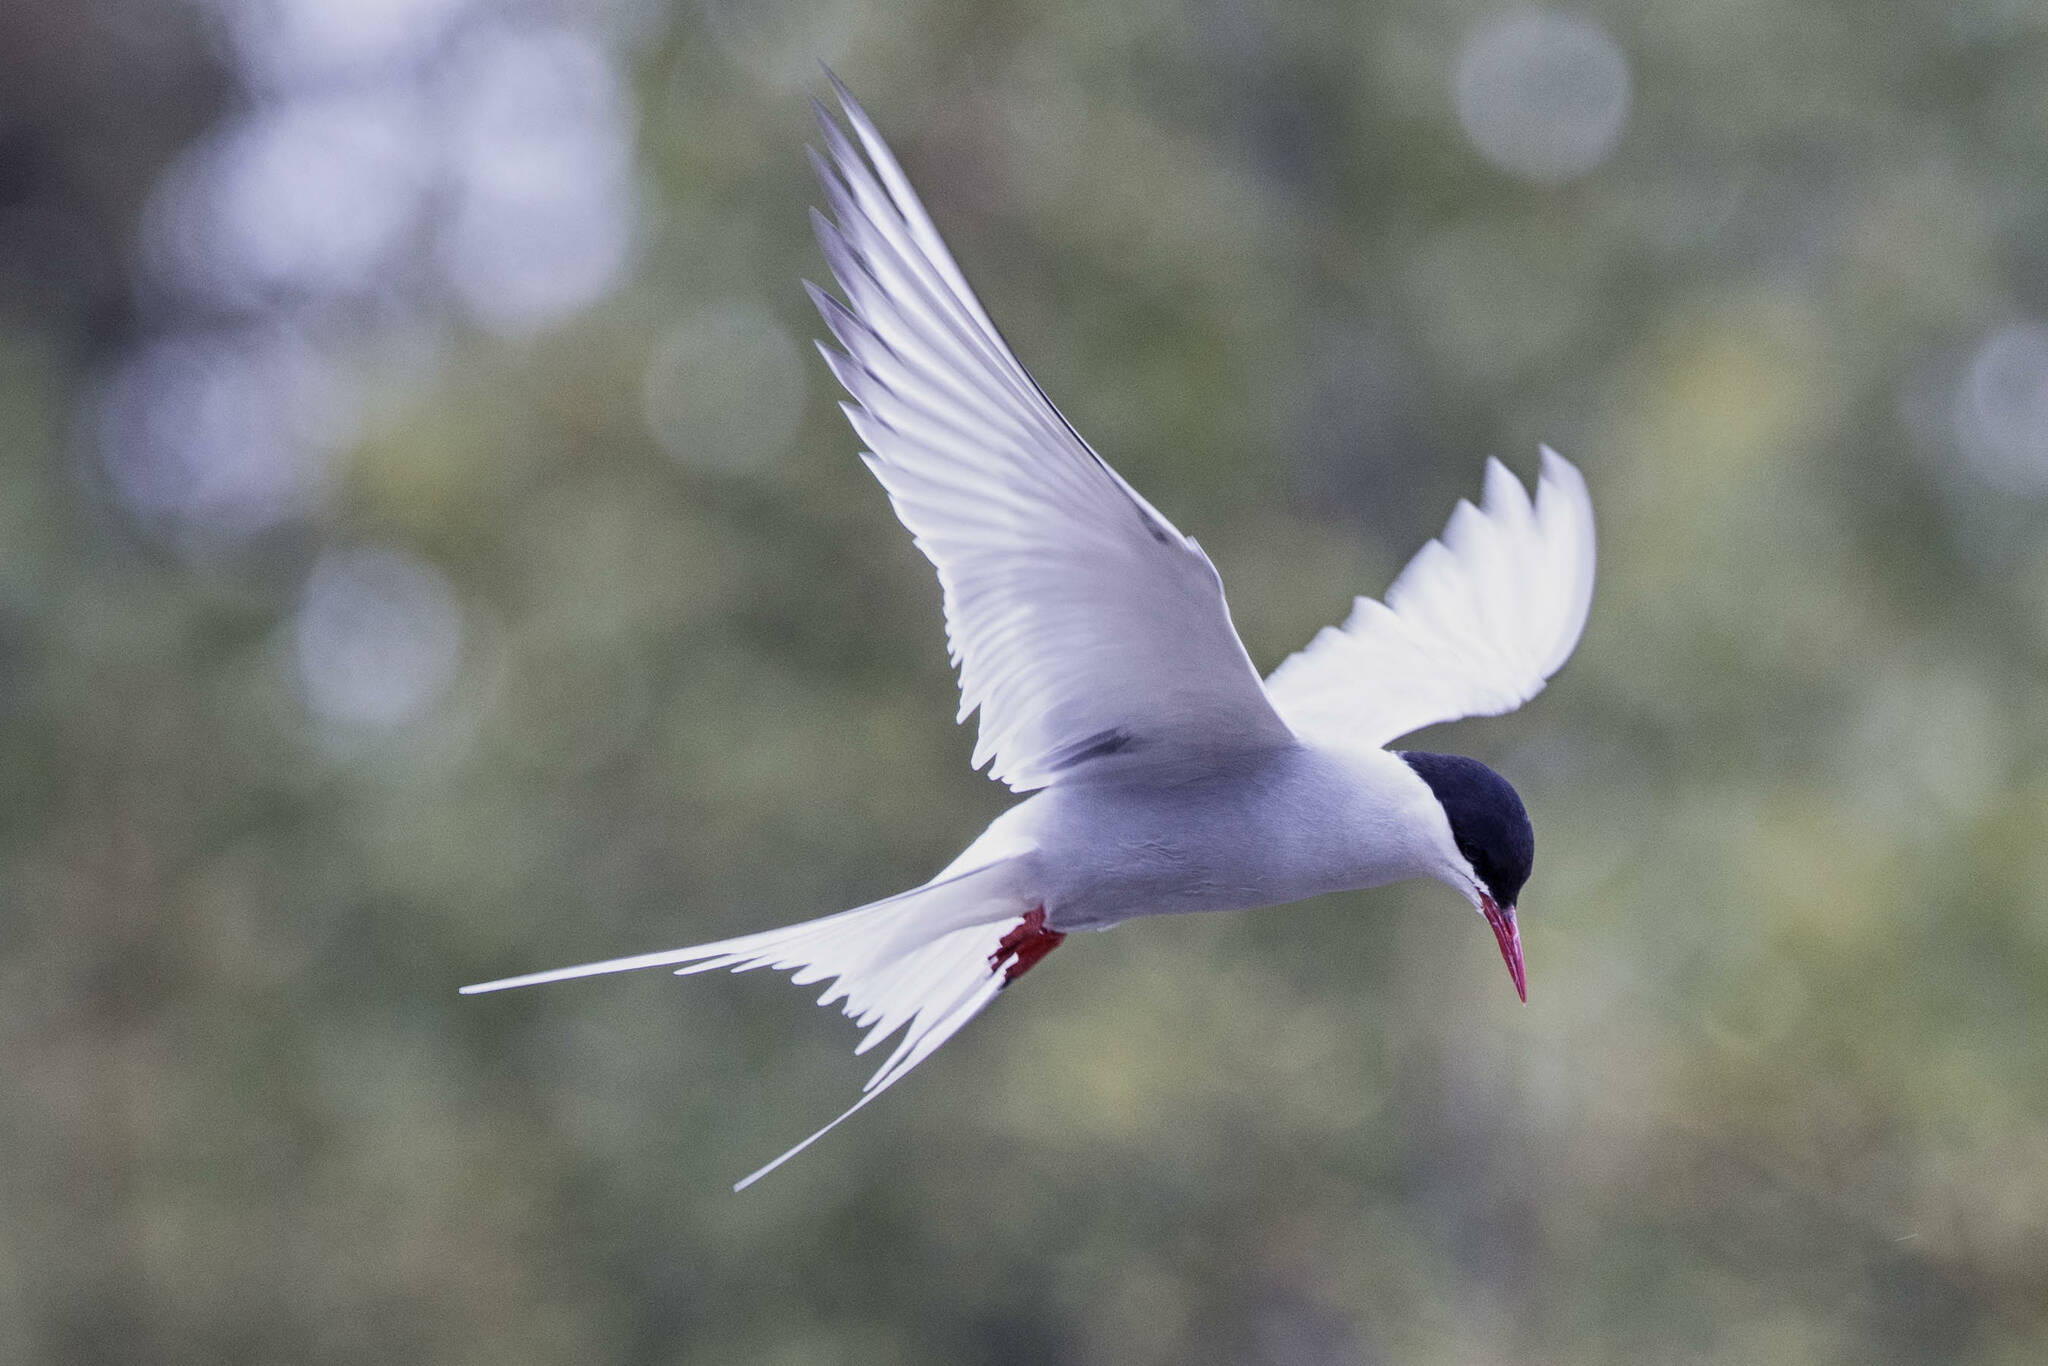 Arctic Tern (Sterna paradisaea) hovering over a possible snack at Mendenhall Lake on June 13. (Courtesy Photo / Kenneth Gill, gillfoto)